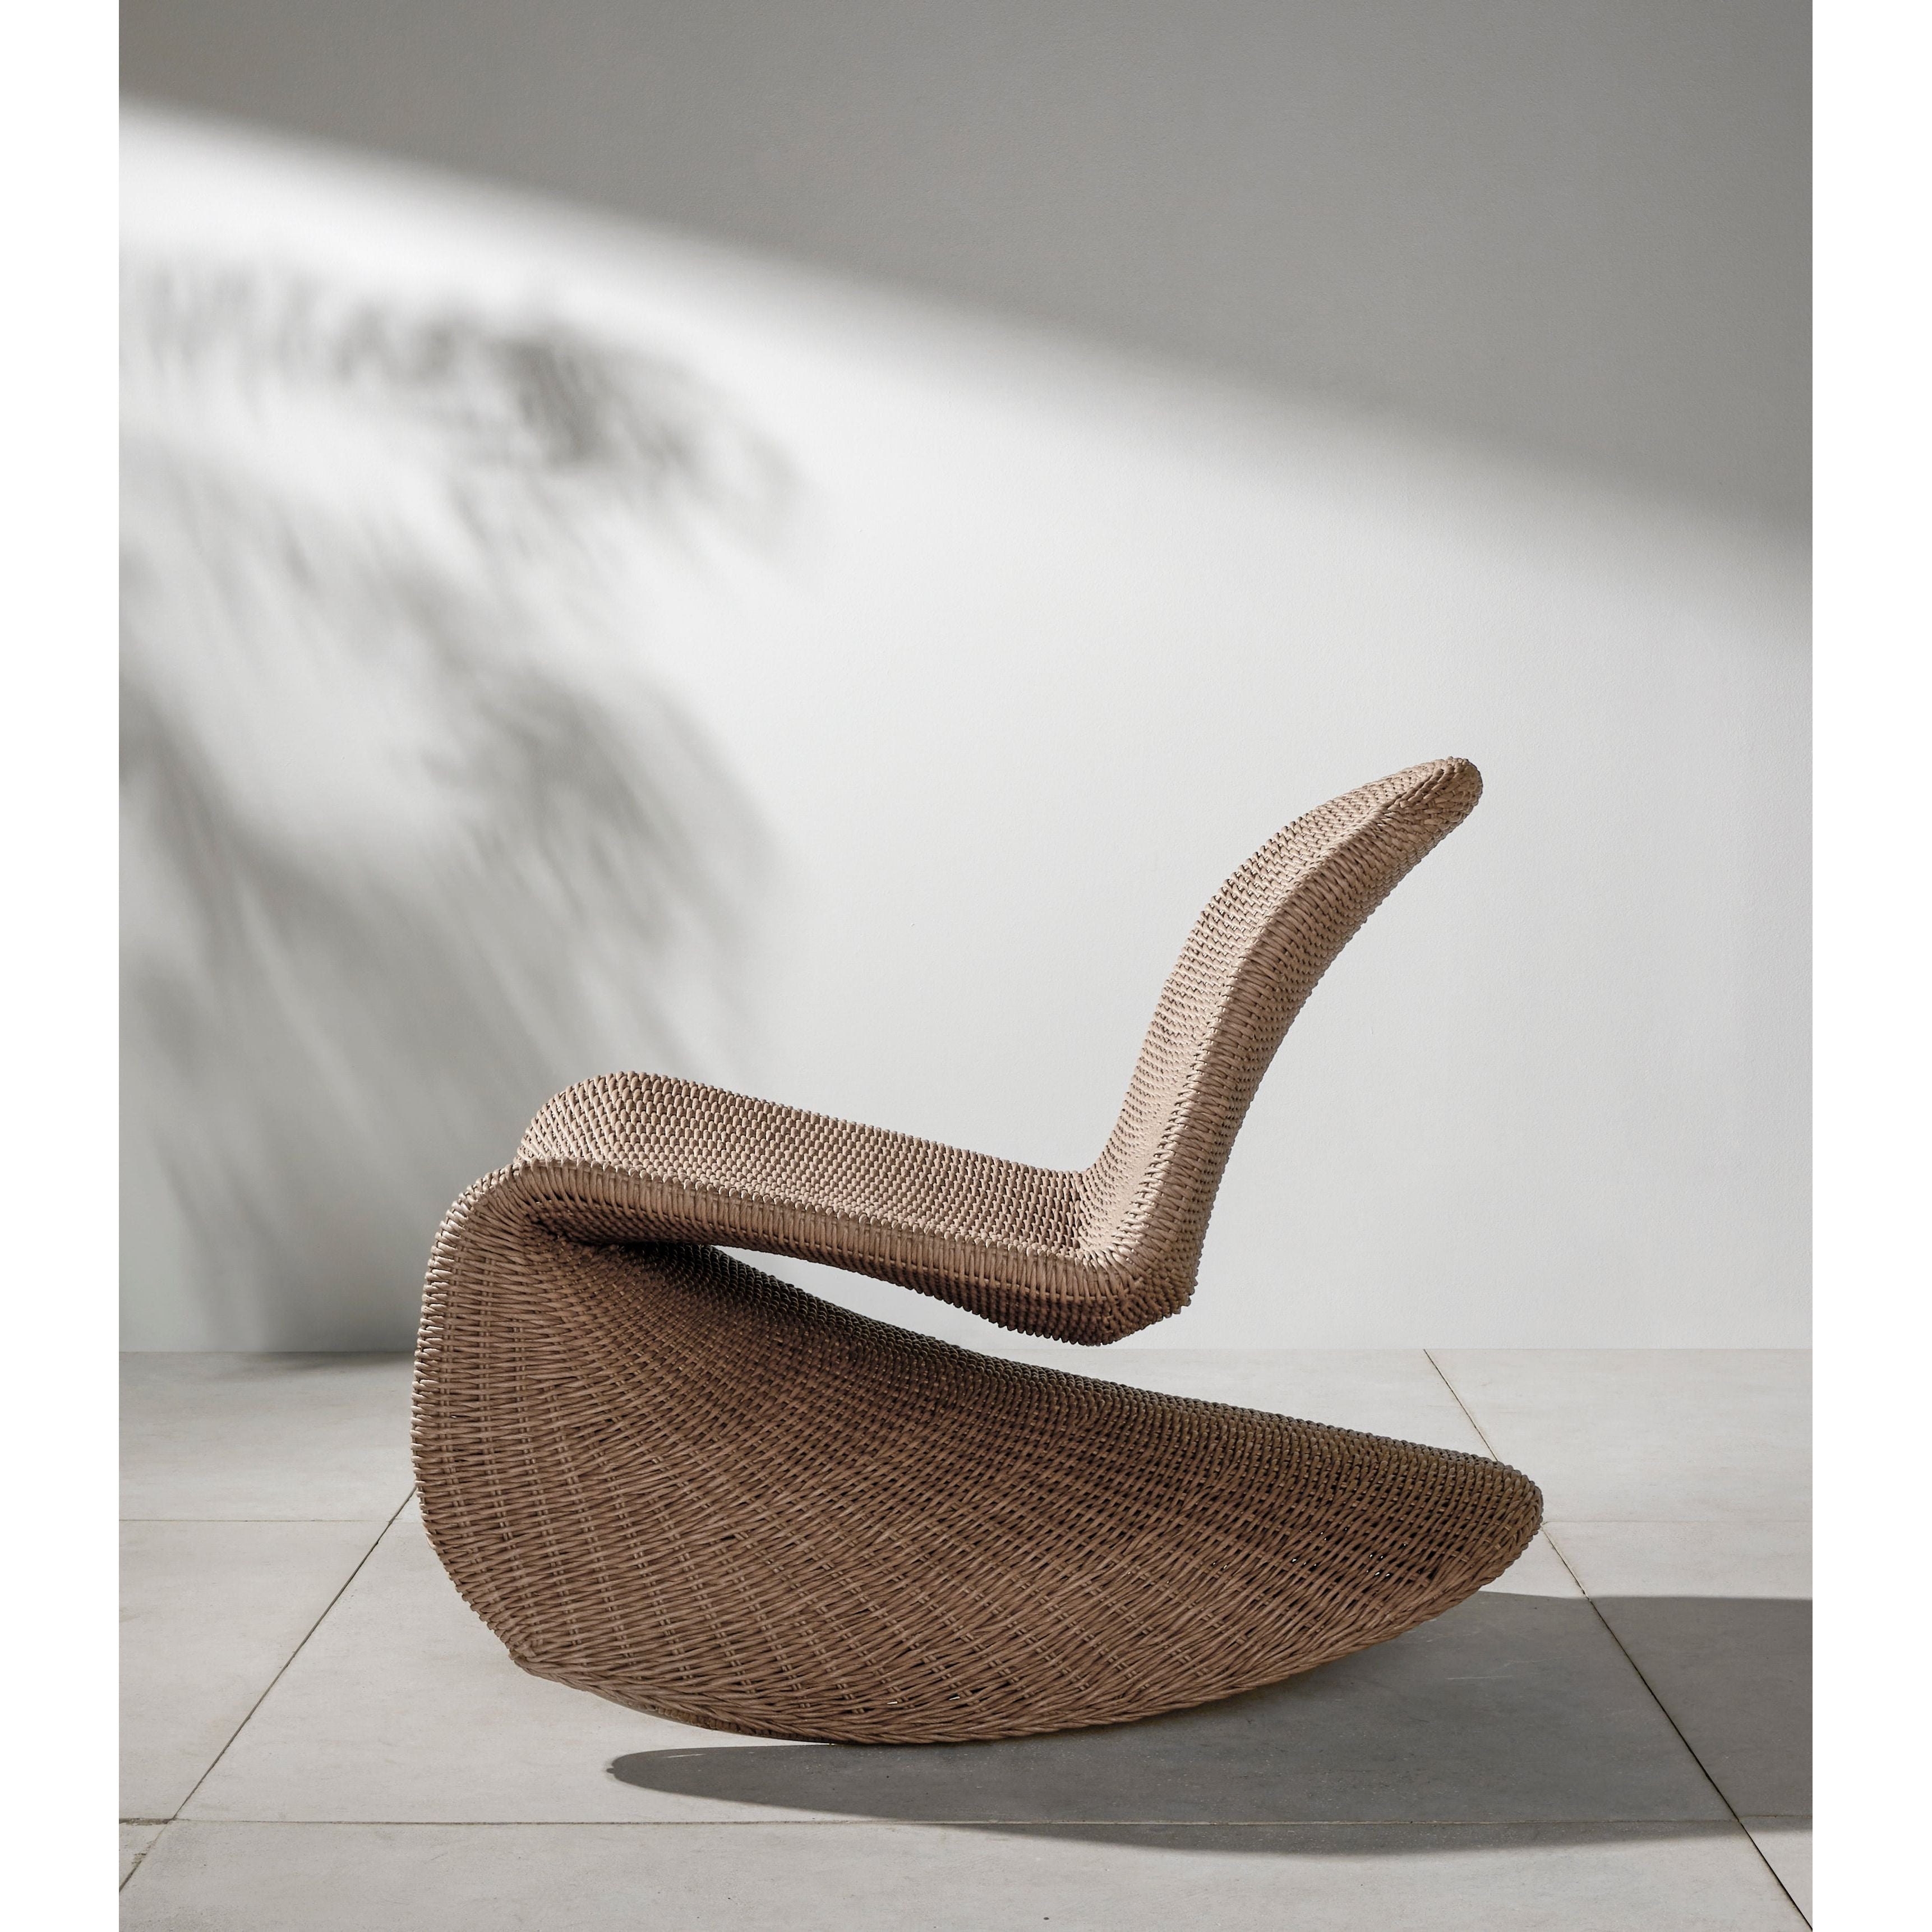 Based off a vintage shape, all-weather wicker seating brings dramatic curves to this statement-making rocking chair. Cover or store indoors during inclement weather and when not in use. Amethyst Home provides interior design, new construction, custom furniture, and area rugs in the Alpharetta metro area.